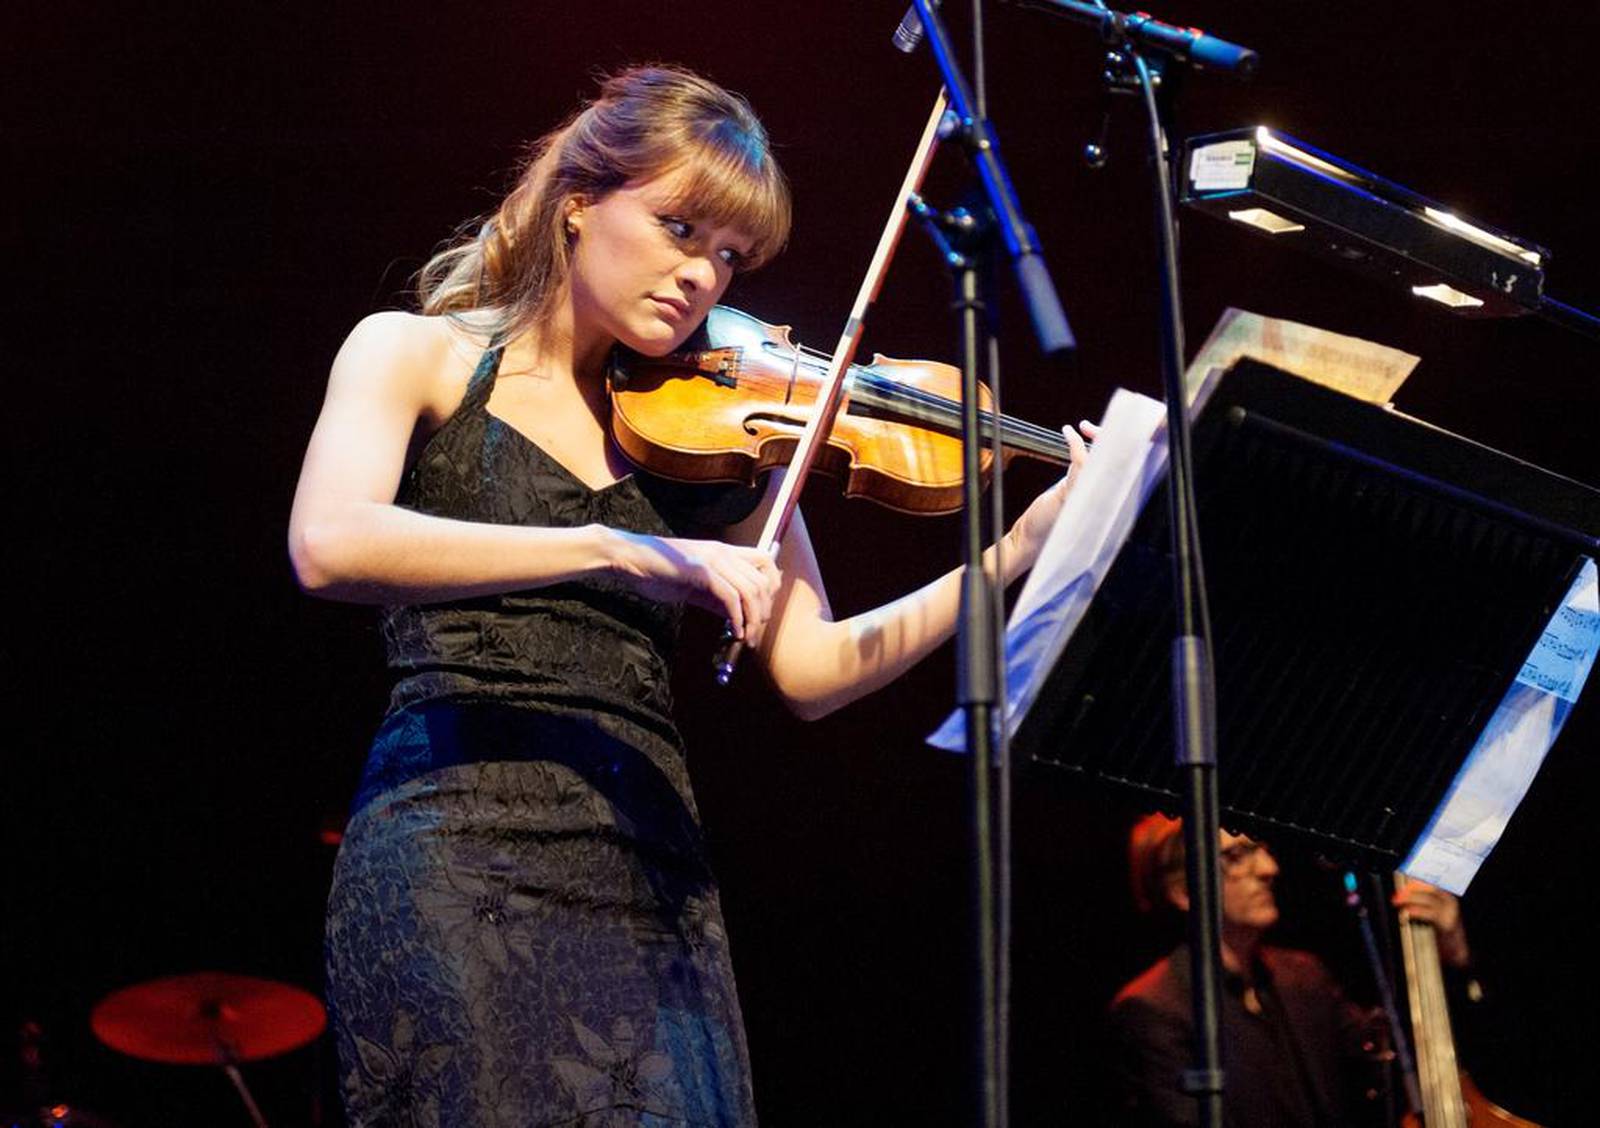 Album review: Nicola Benedetti’s latest album is an emotional journey ...